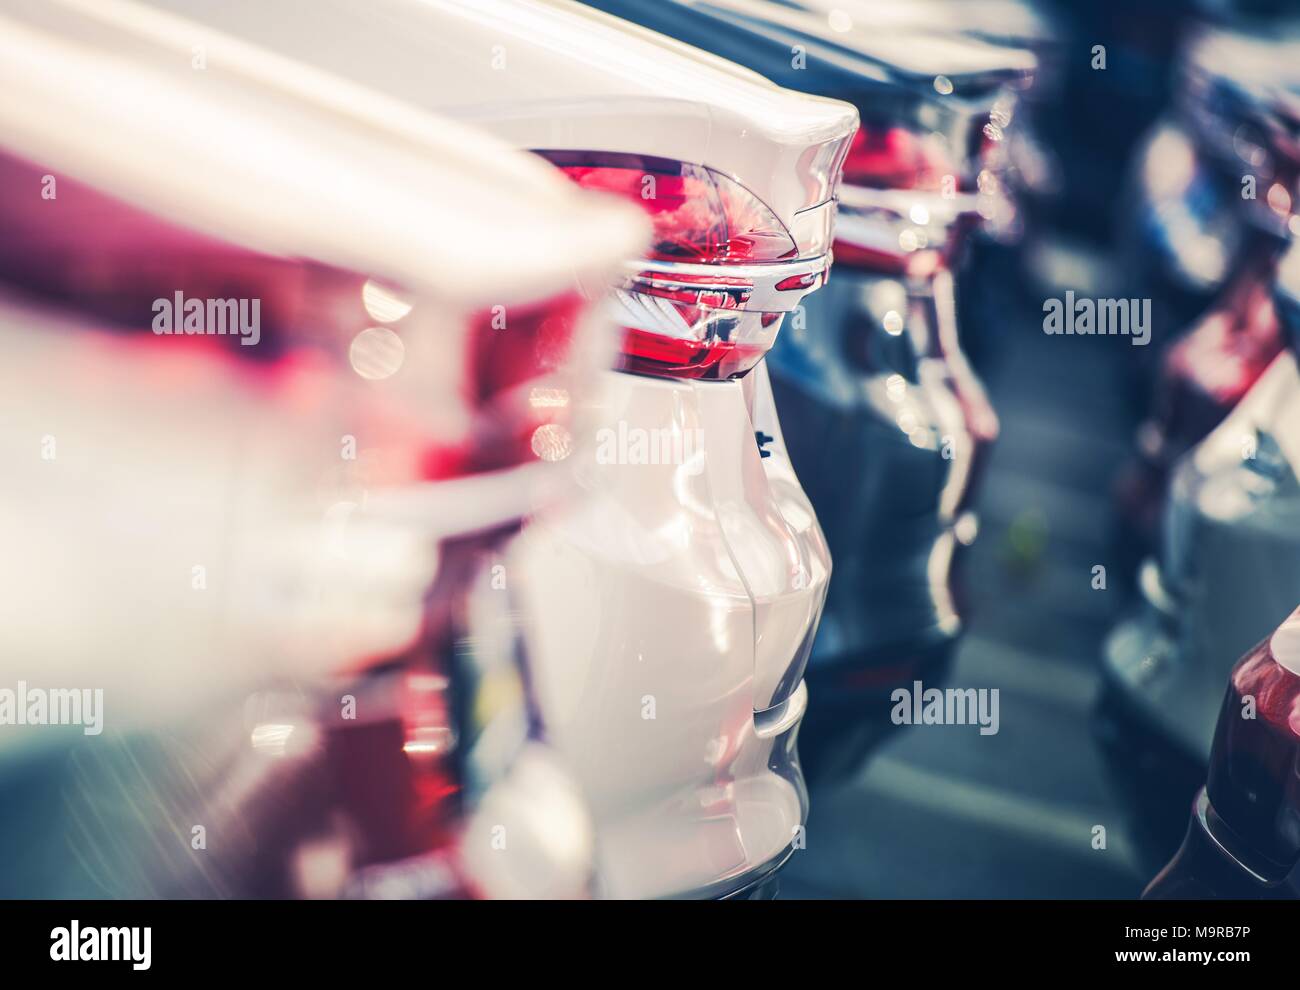 New Cars in Dealer Stock. Brand New Vehicles For Sale. Closeup Photo with Shallow Depth of Field. Transportation and Automotive Industry. Stock Photo